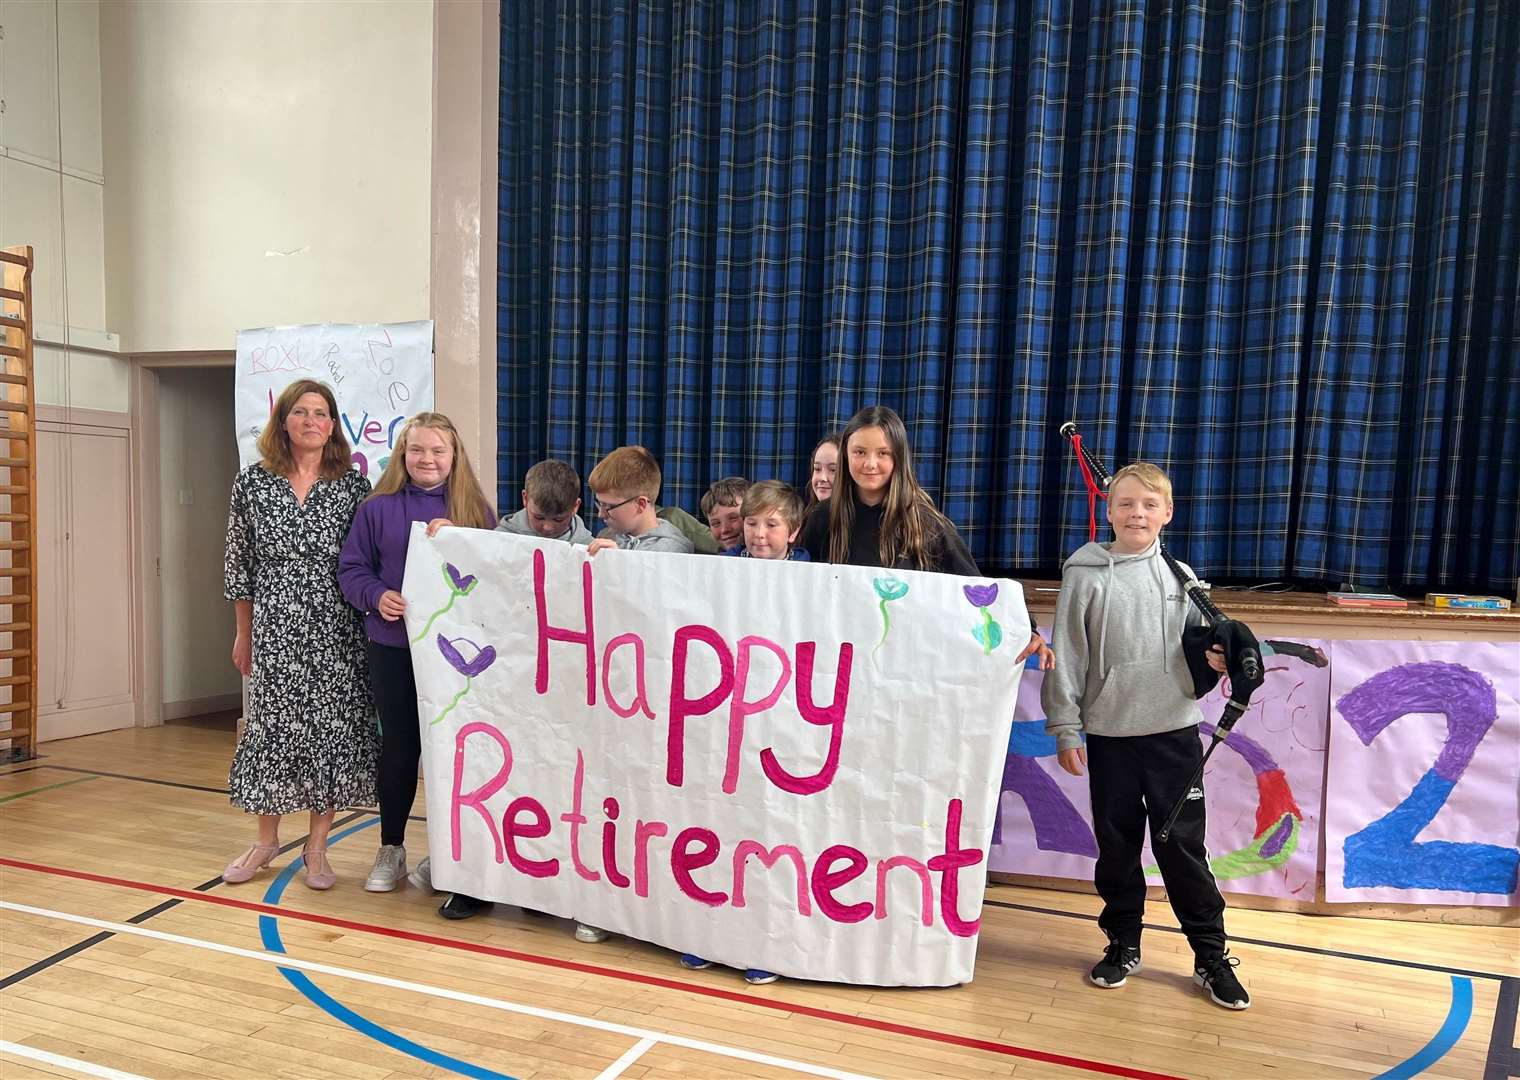 Helmsdale pupils made a huge poster saying "Happy Retirement".